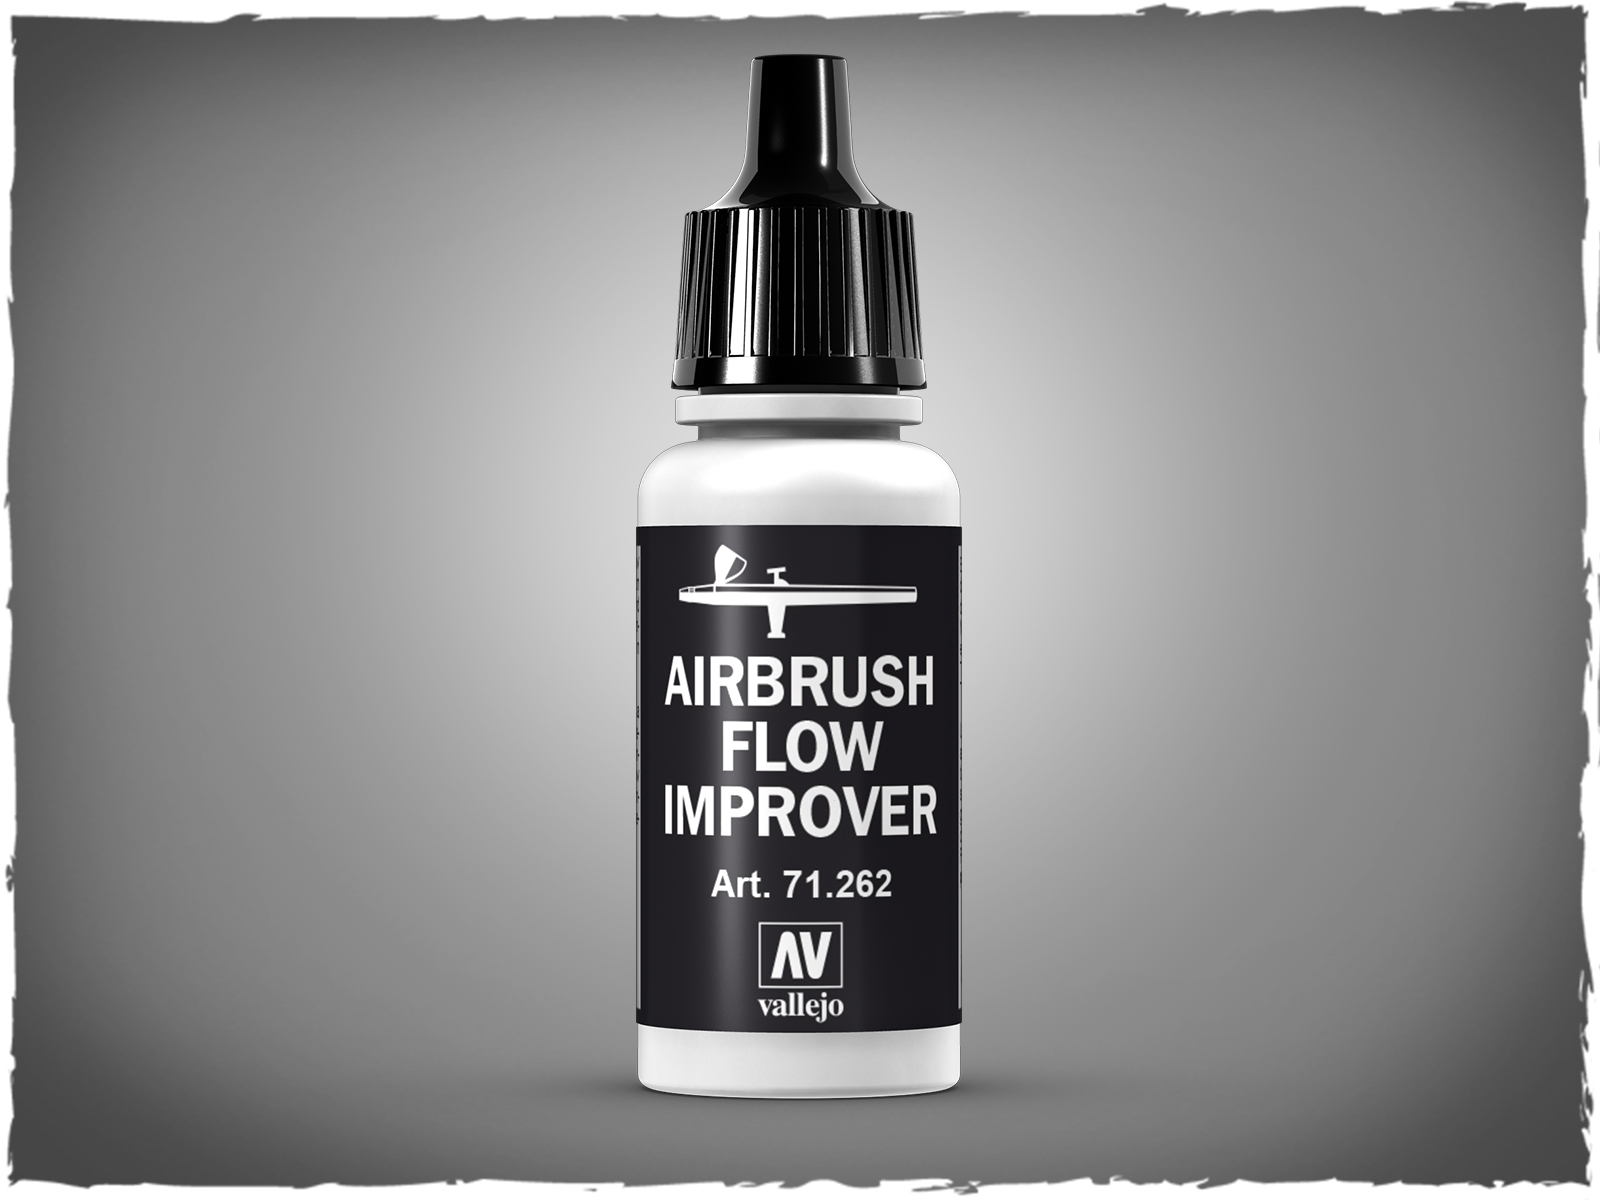 Vallejo auxiliaries - 71.262 Airbrush Flow Improver